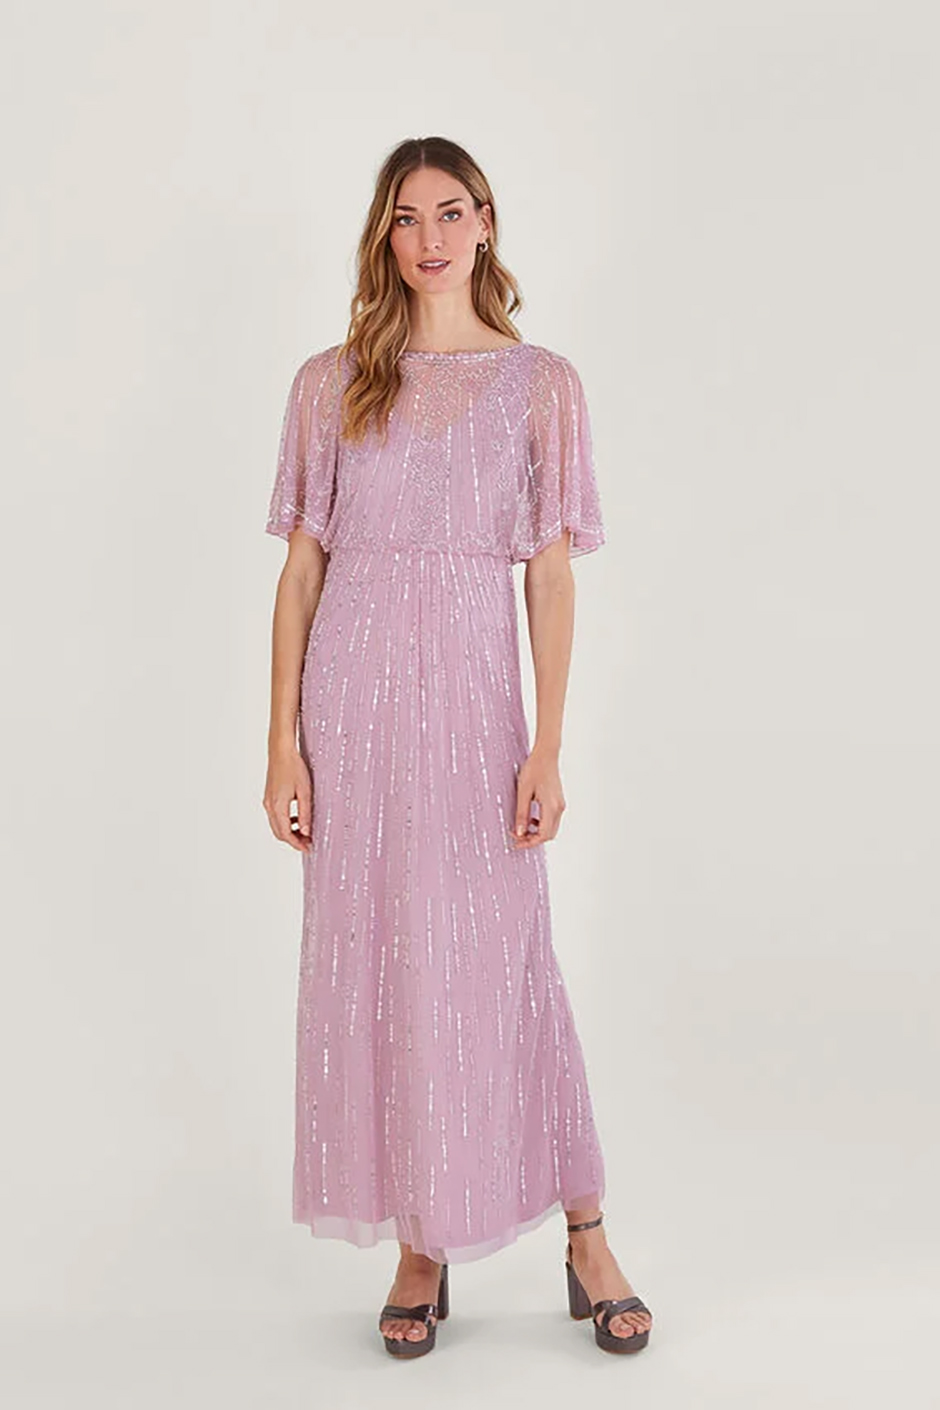 Spring bridesmaid dress from Monsoon - Pink maxi dress with floral sequin design